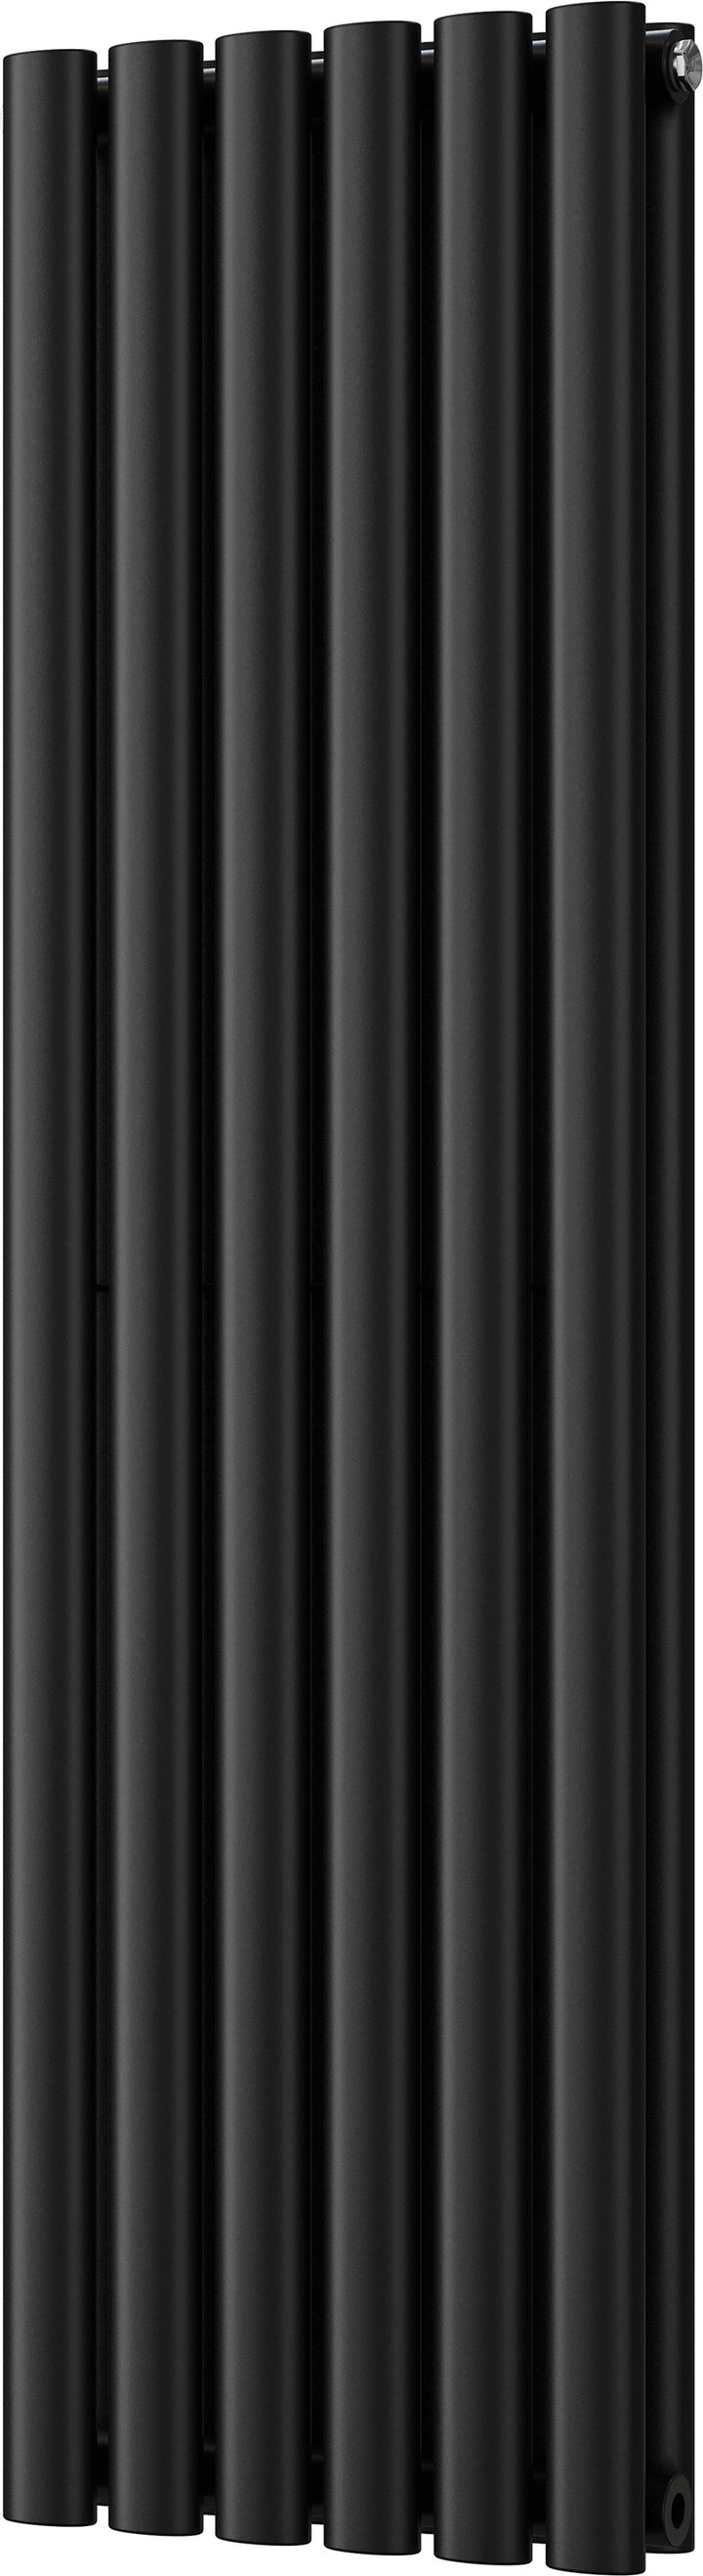 Omeara - Black Vertical Radiator H1200mm x W348mm Double Panel